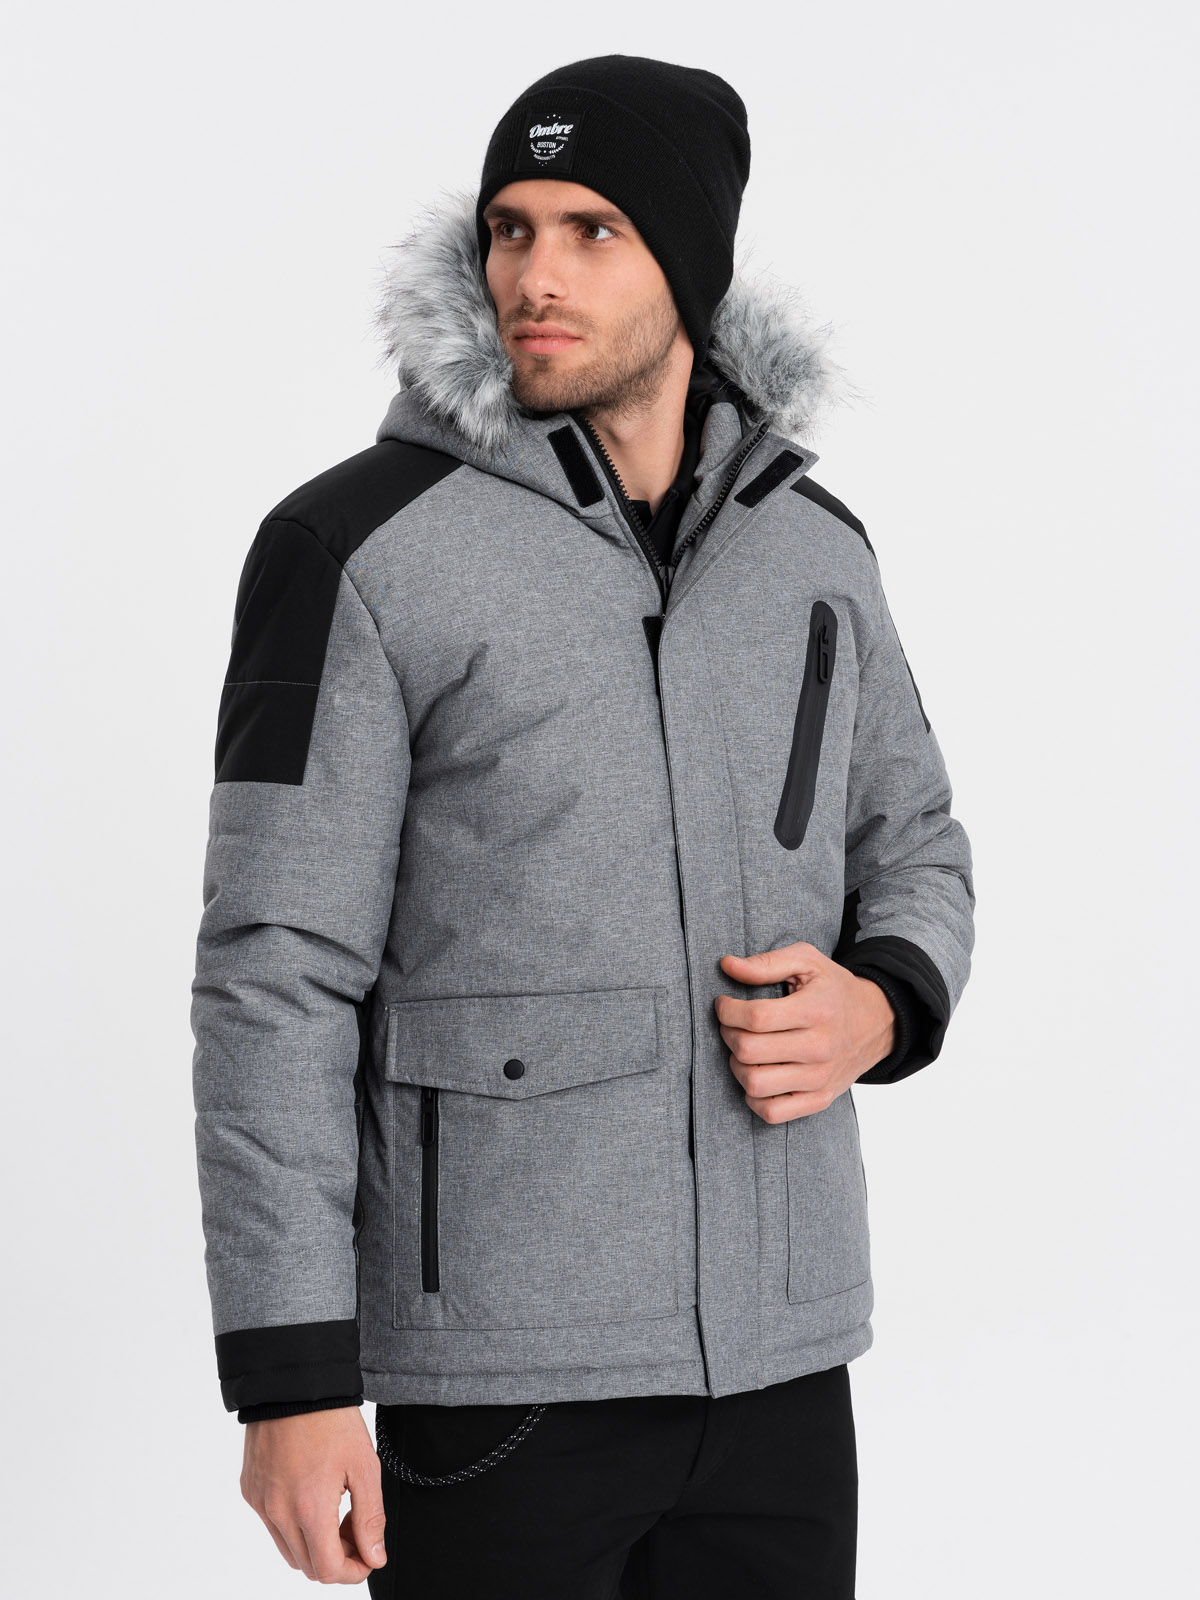 Levně Ombre Men's winter jacket with adjustable hood with detachable fur - grey and black